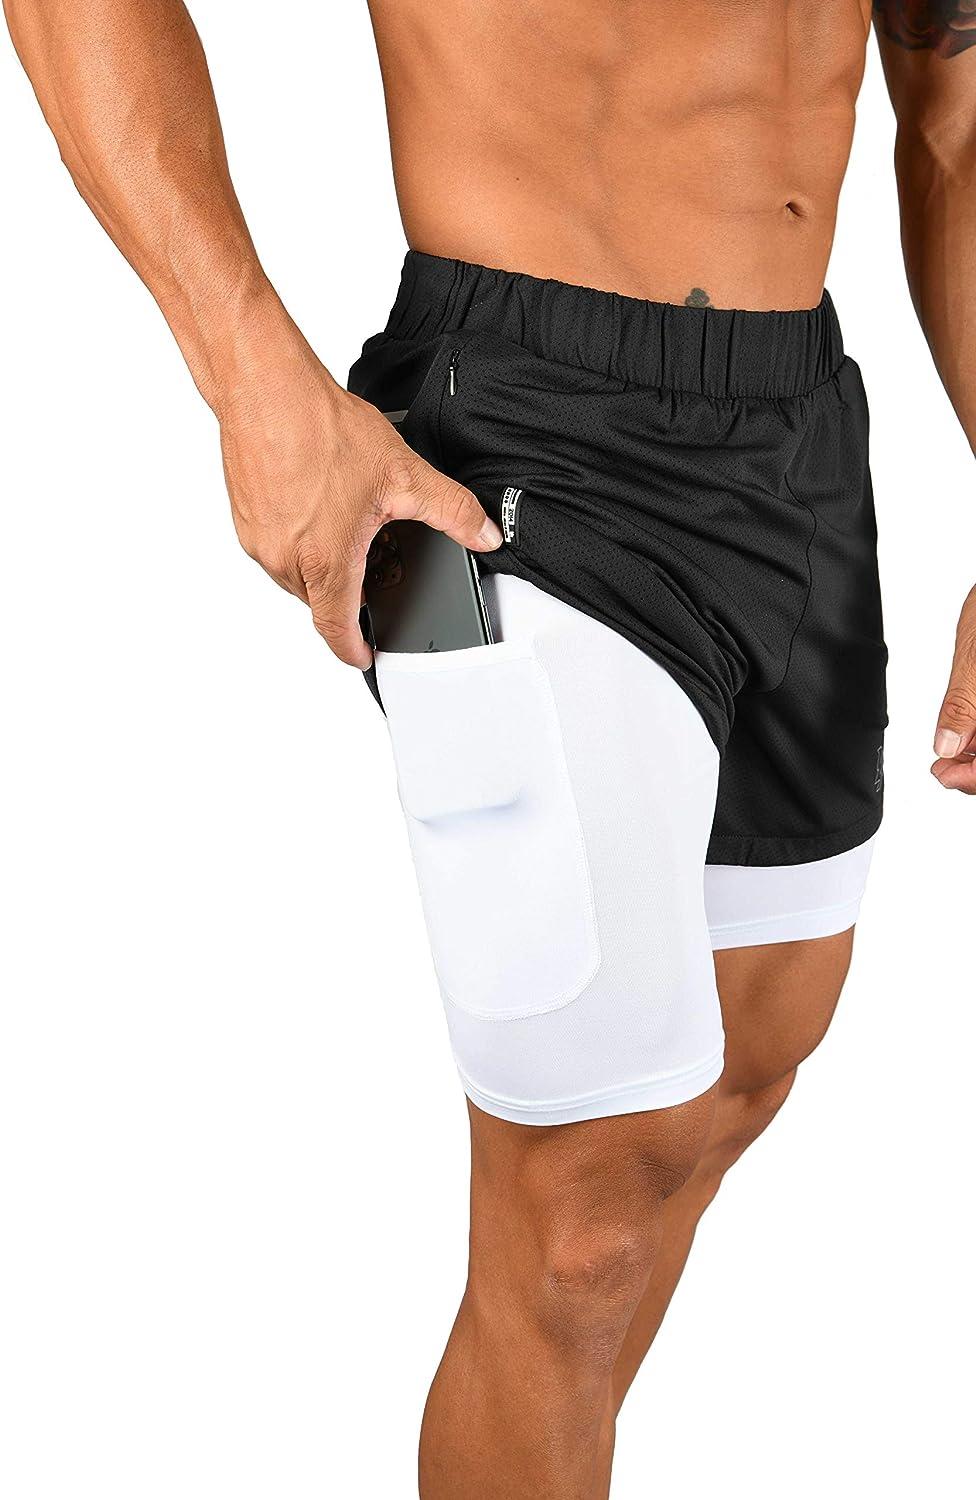 YoungLA Compression Shorts - Soft, Breathable, Stretchy Mens Compression  Shorts with Pocket - Compression Shorts for Men 105 Black/White X-Large